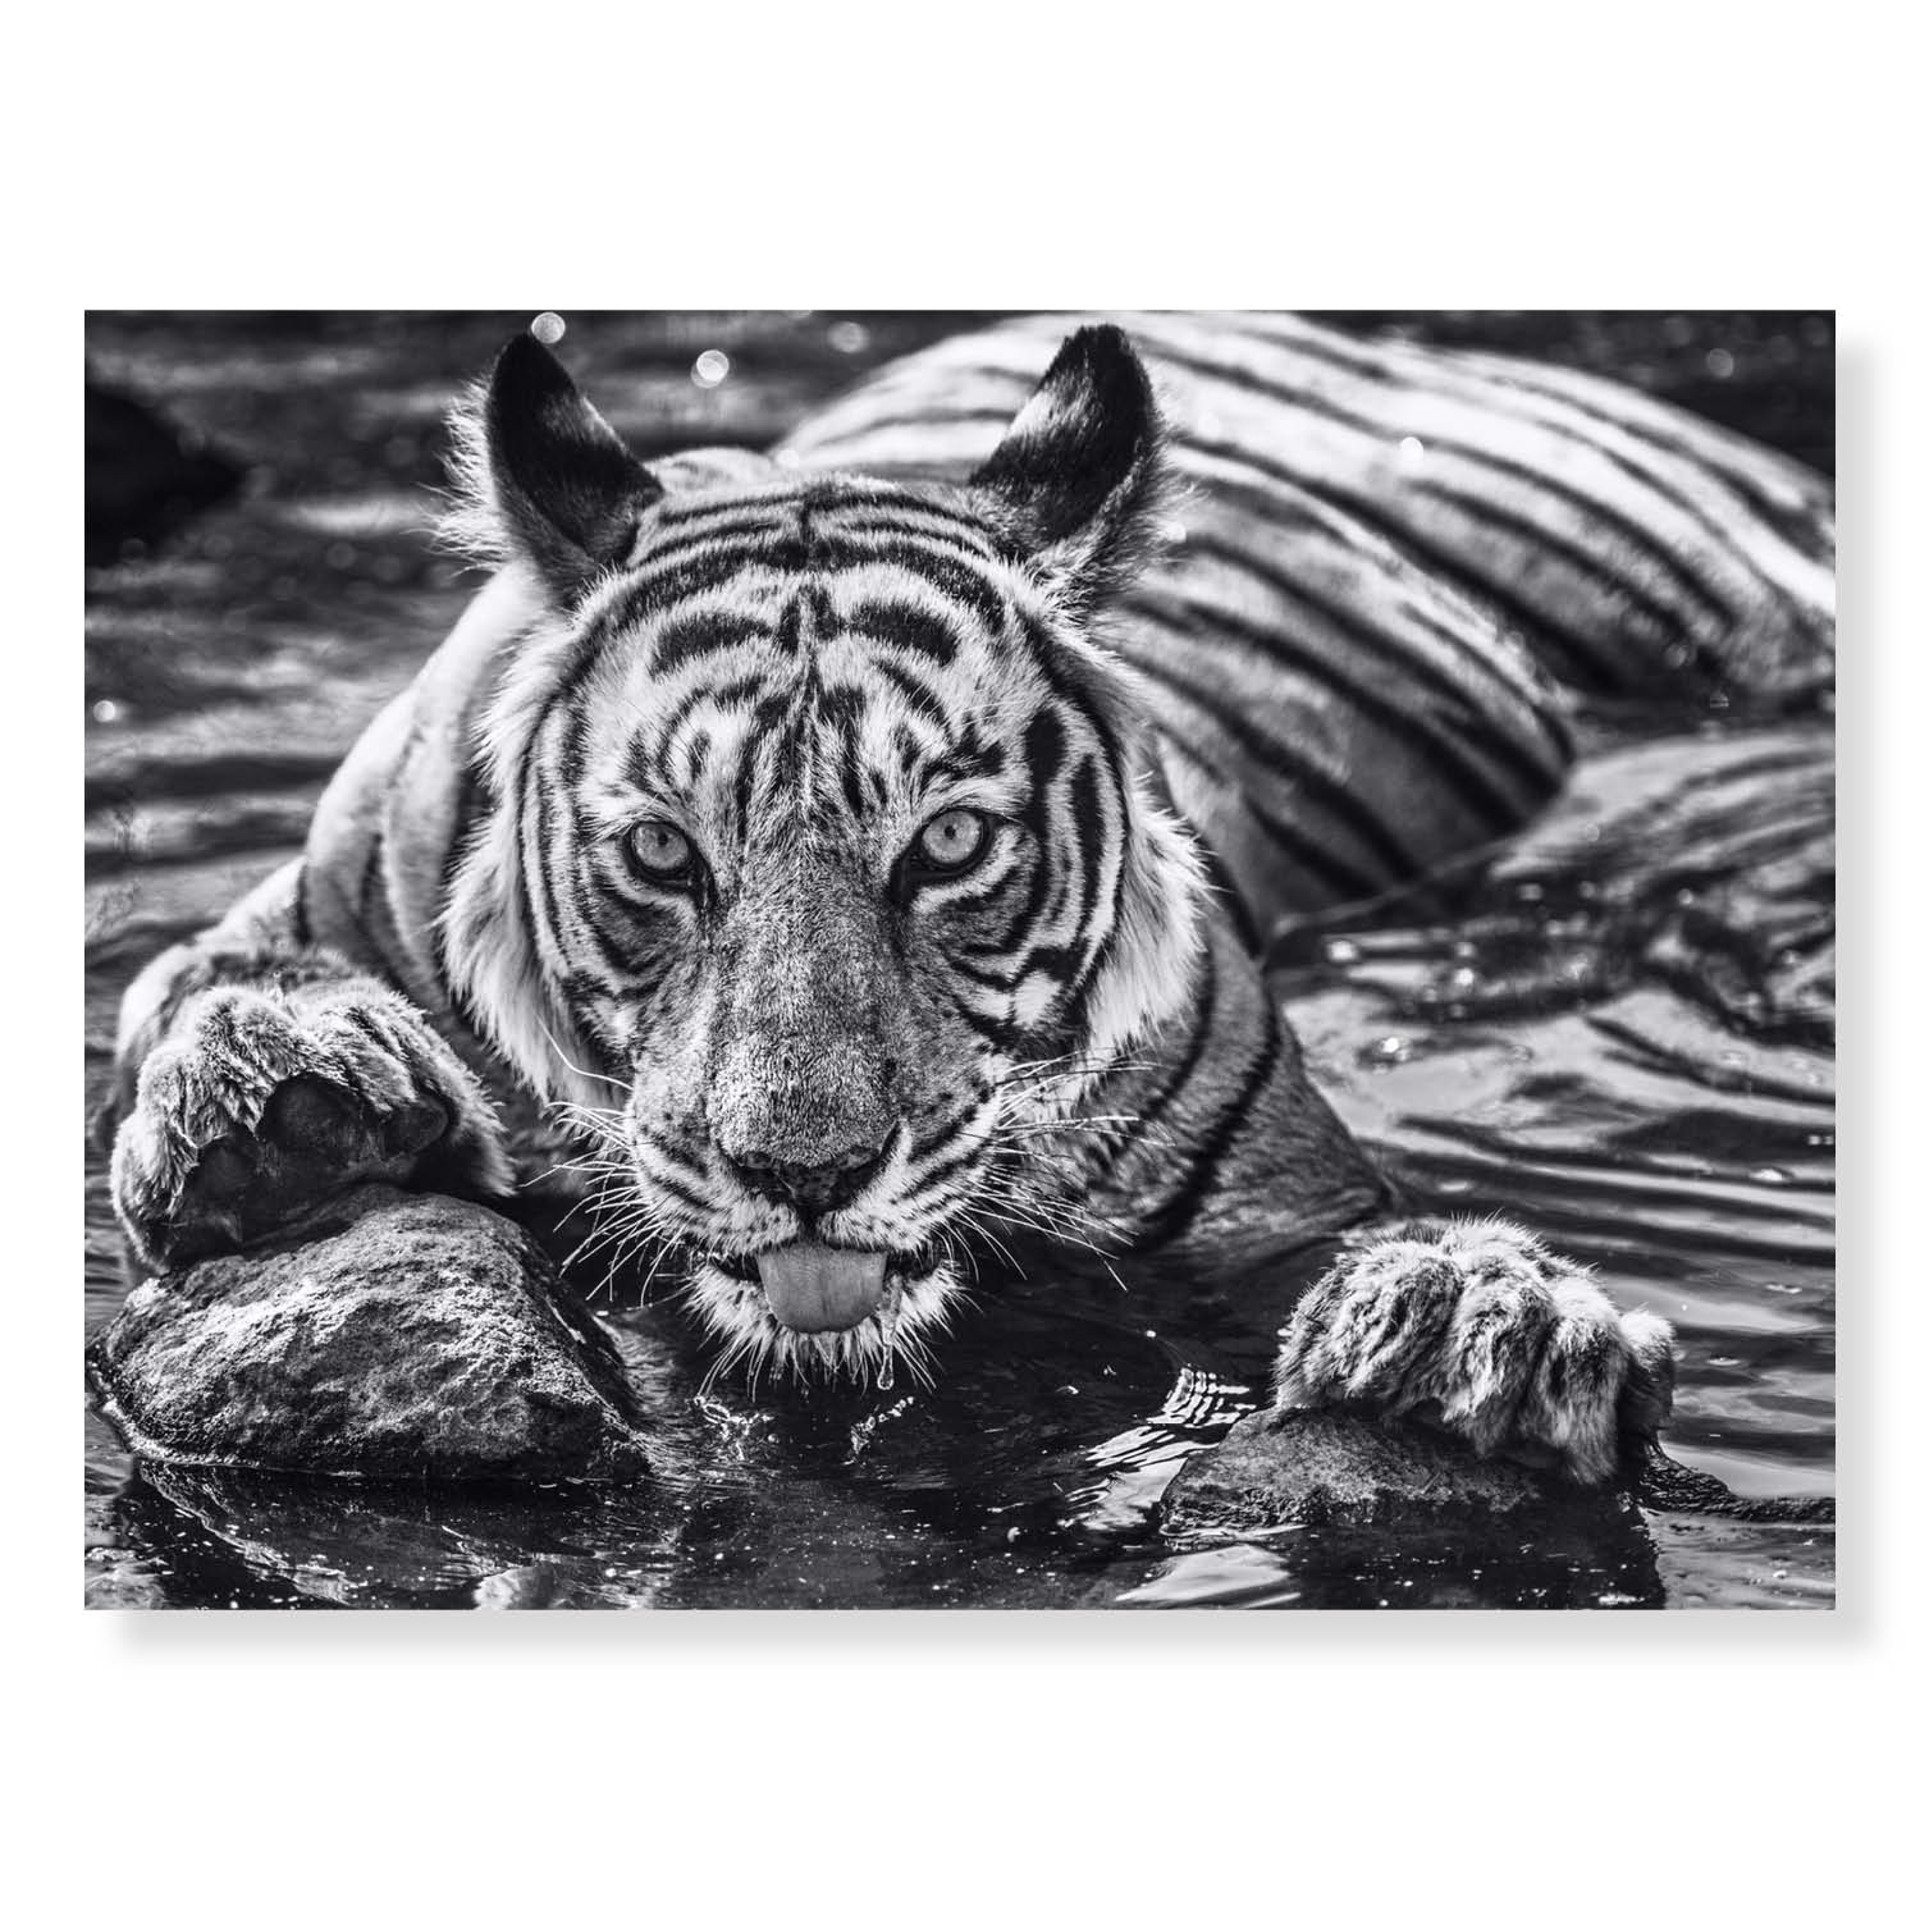 The Queen of Ranthamb Ore by David Yarrow